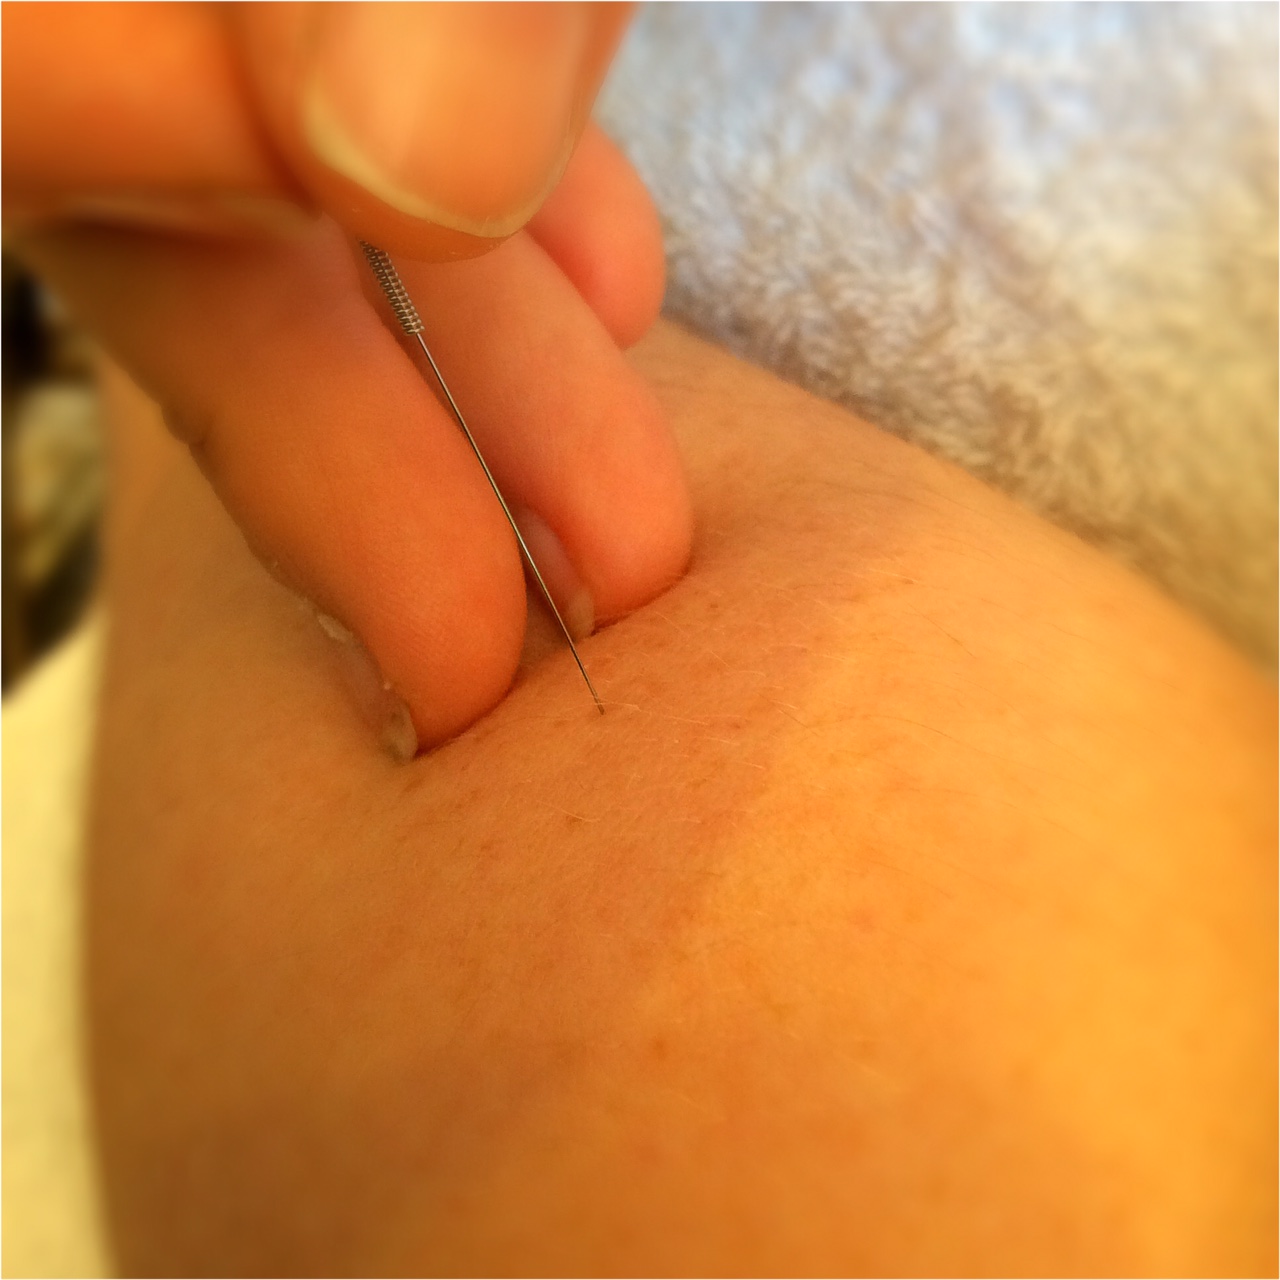 Dry Needling & Acupuncture … what’s the difference?